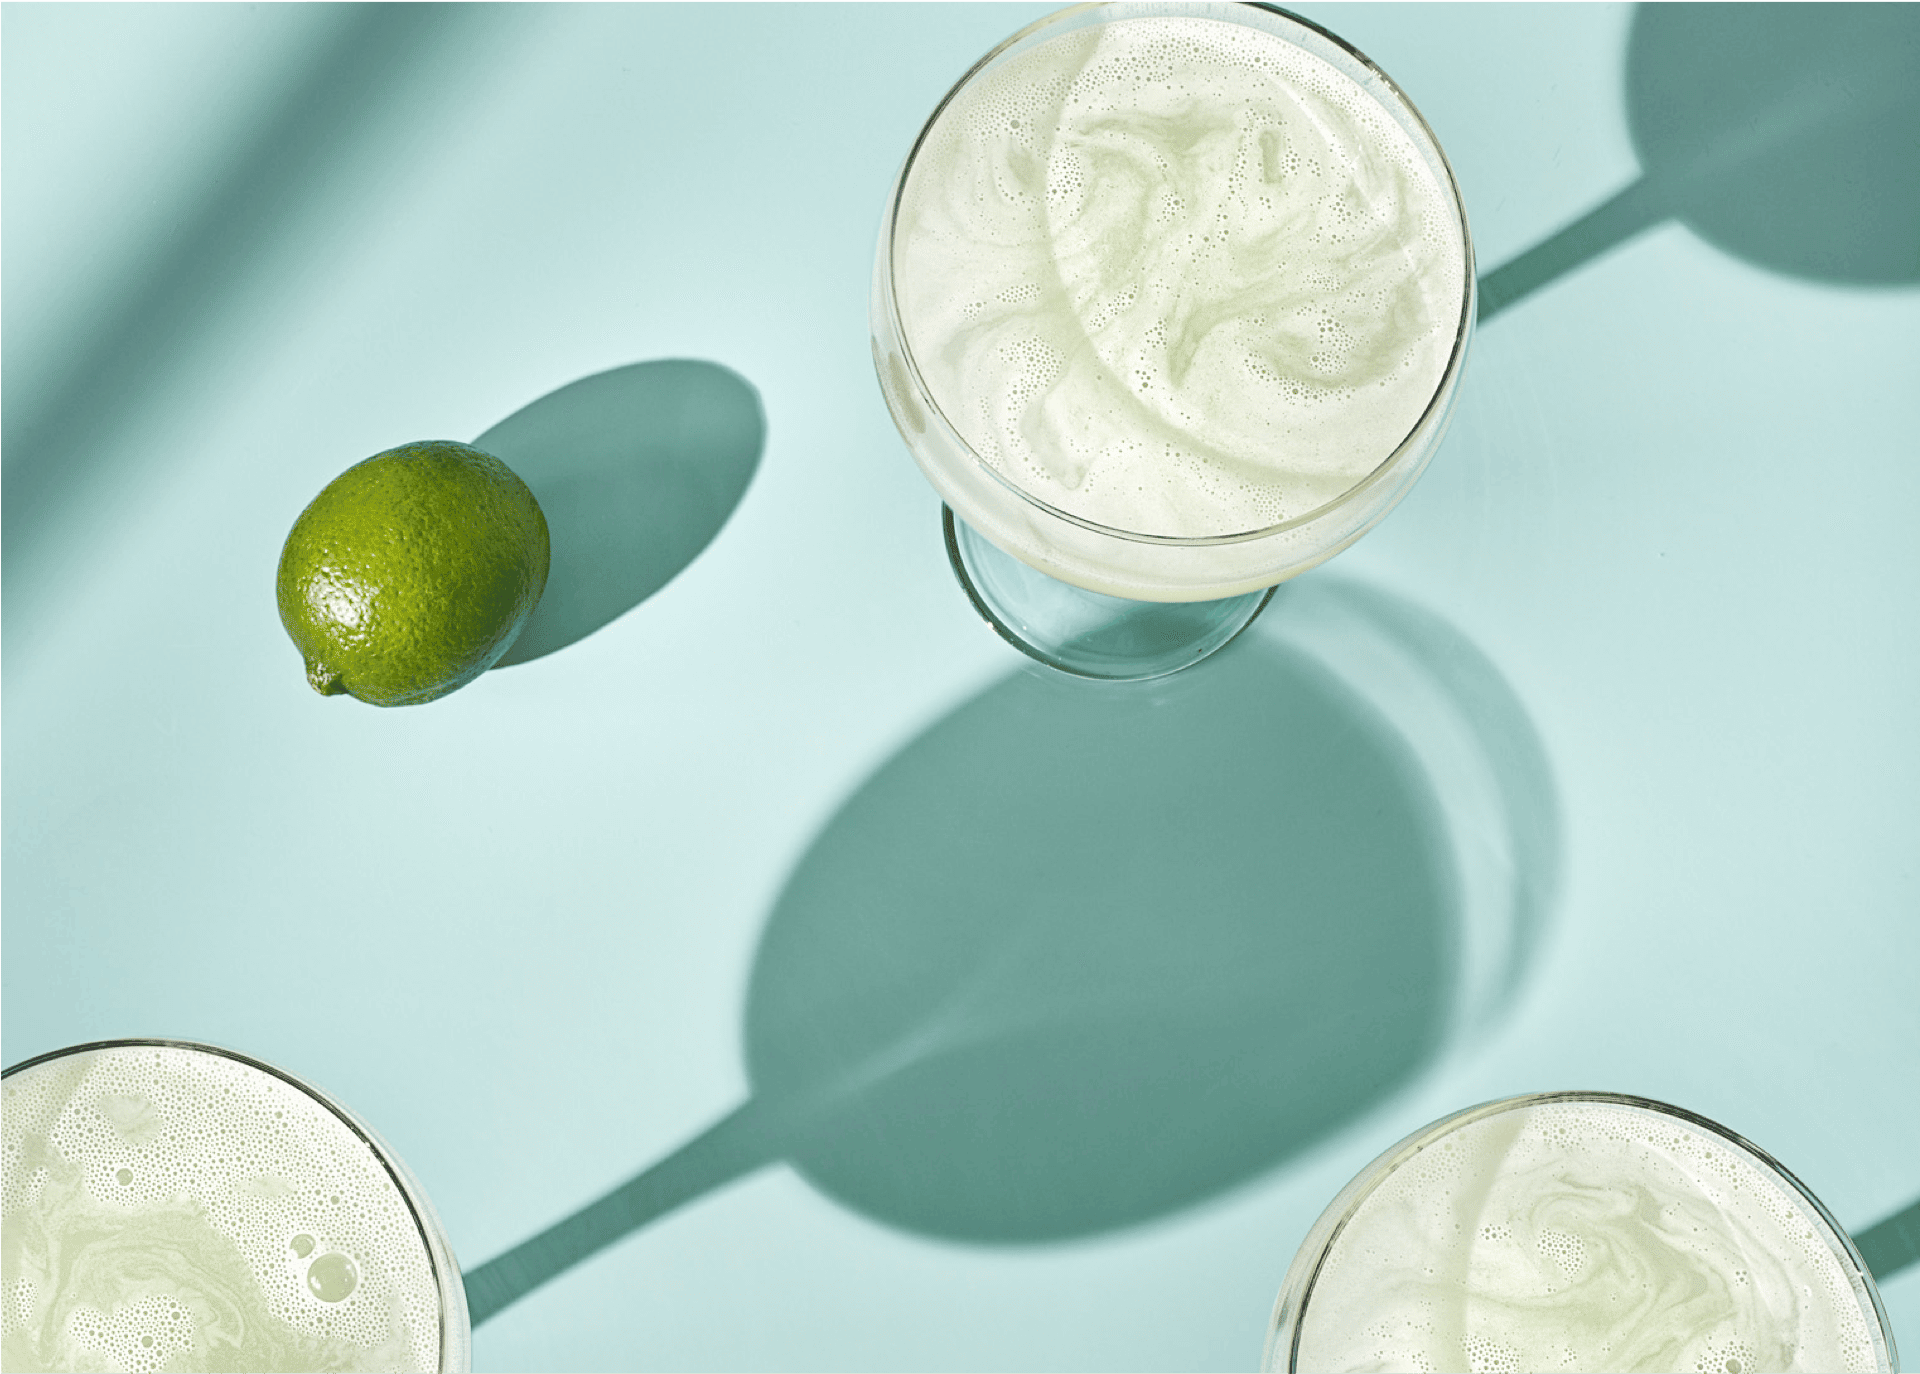 Ten To One daiquiri with lime